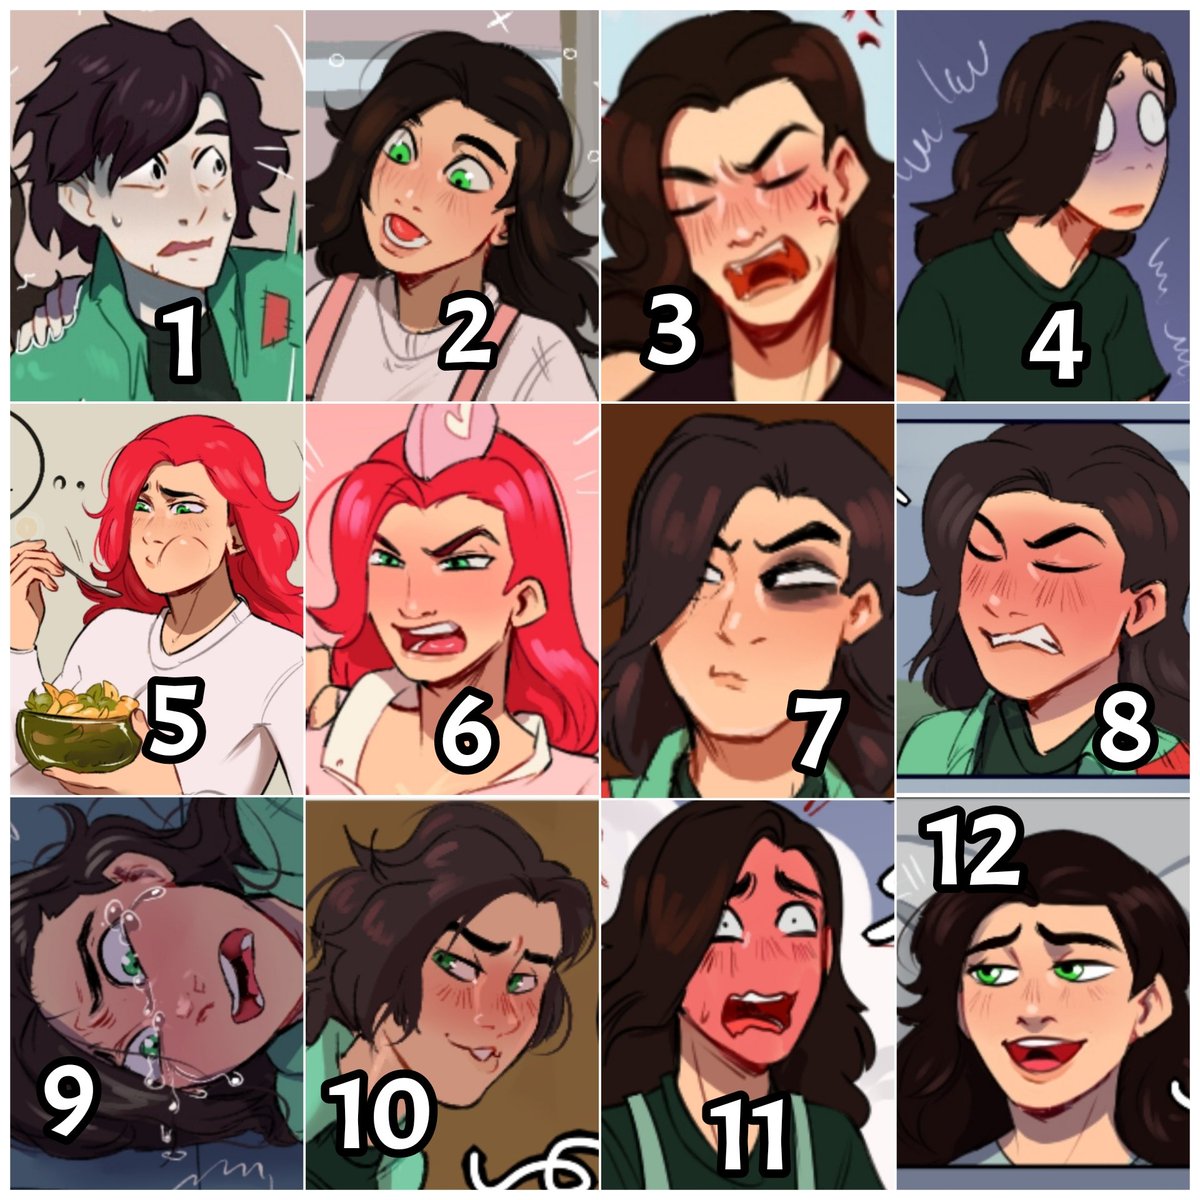 What's your mood today? :v
(Recopilation)
#draw #drawings #oc #dibujo #digitaldraw